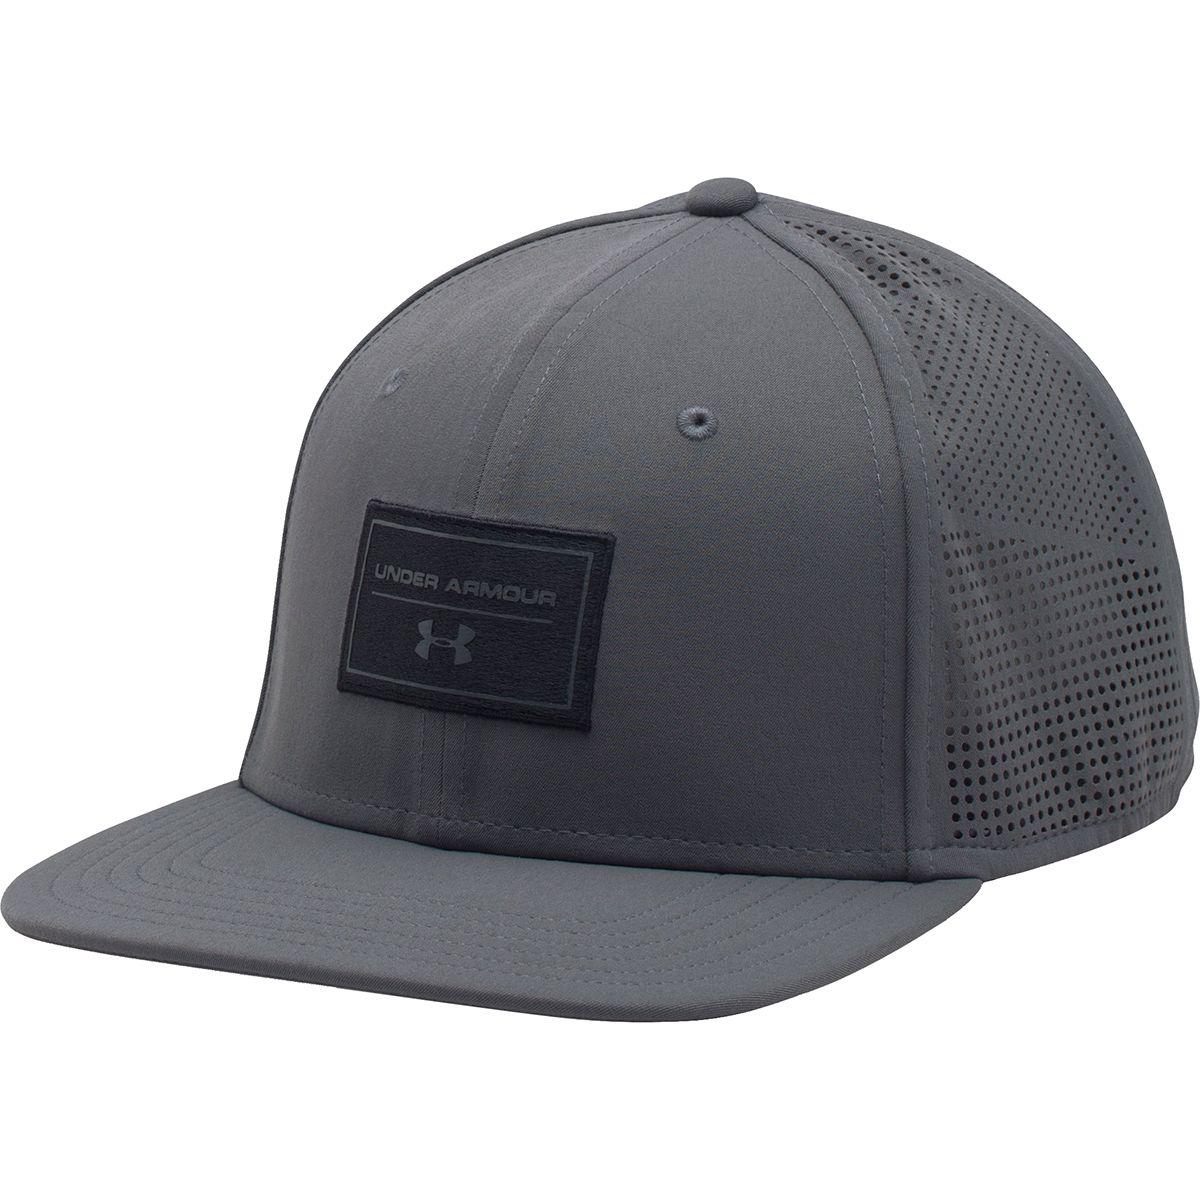 Under Armour Synthetic Supervent Flat Brim Snapback Hat in  Graphite/Black/Graphite (Black) for Men - Lyst